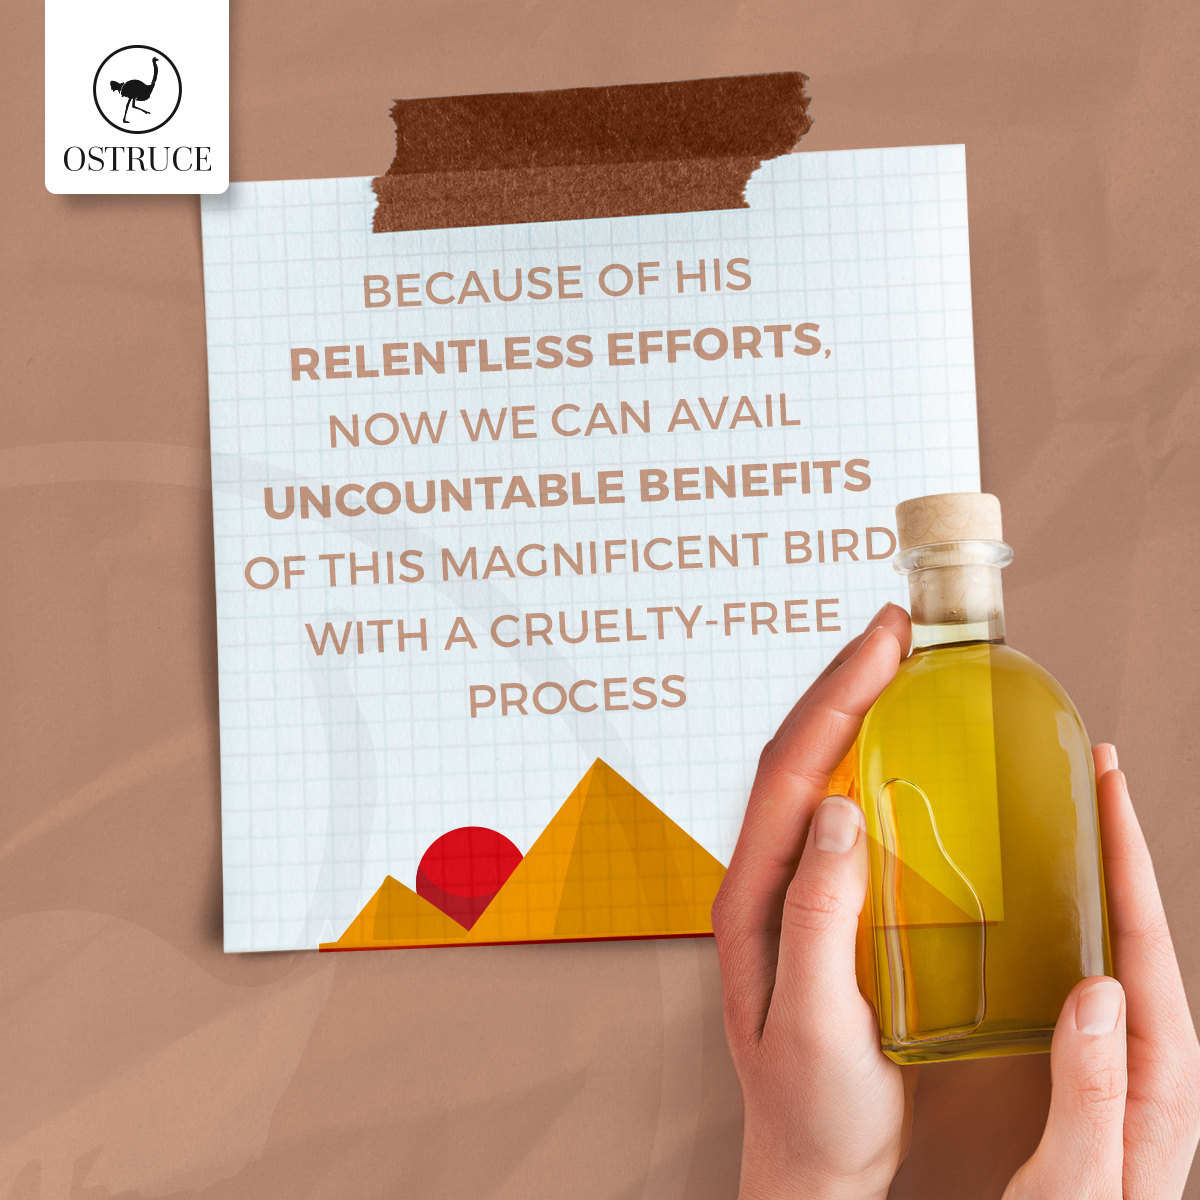 Mr. Kazi's efforts have made it possible to make the most of the benefits Allah has blessed us with.💛

Order now: ostruce.com

#Ostruce #FarqTouPartaHai #nature #DidYouKnow #ostrichfarm